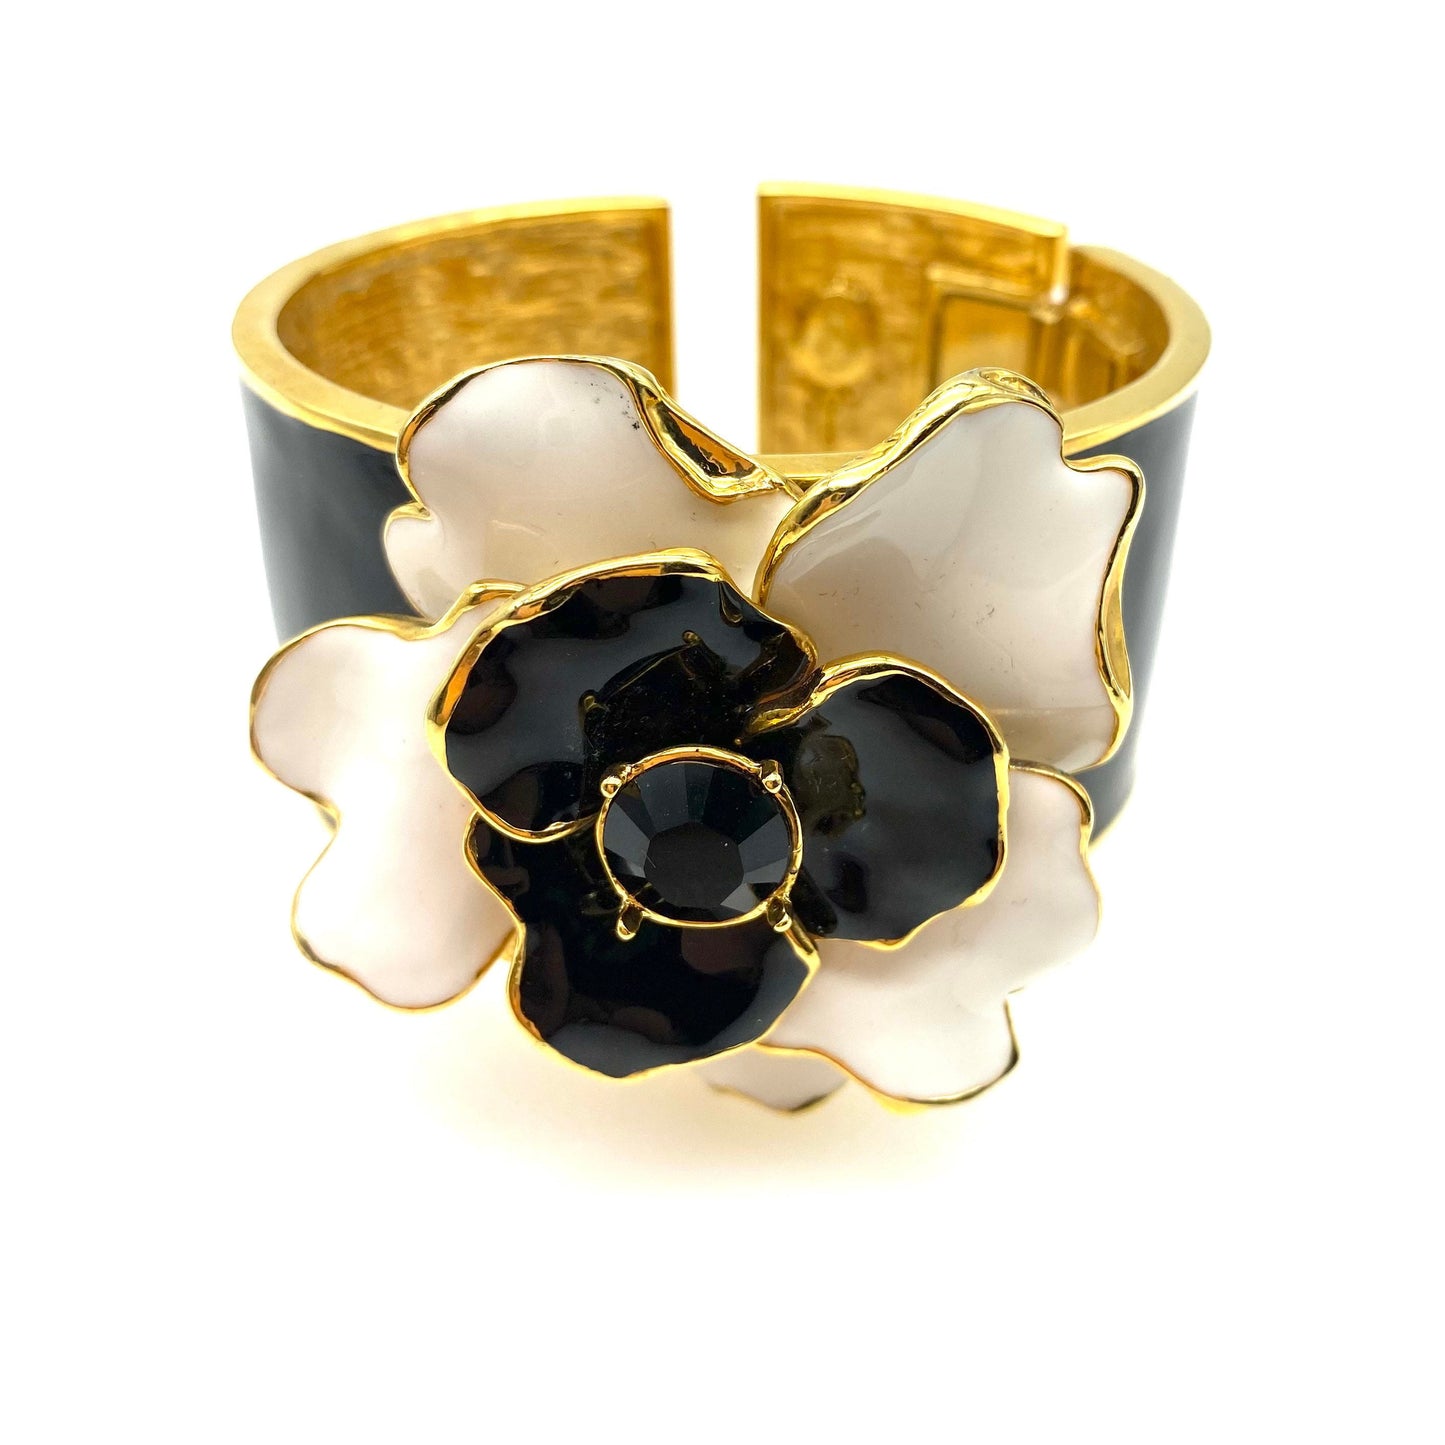 Kenneth Jay Lane Gold Plated and Enamel Camellia Clamper Bangle